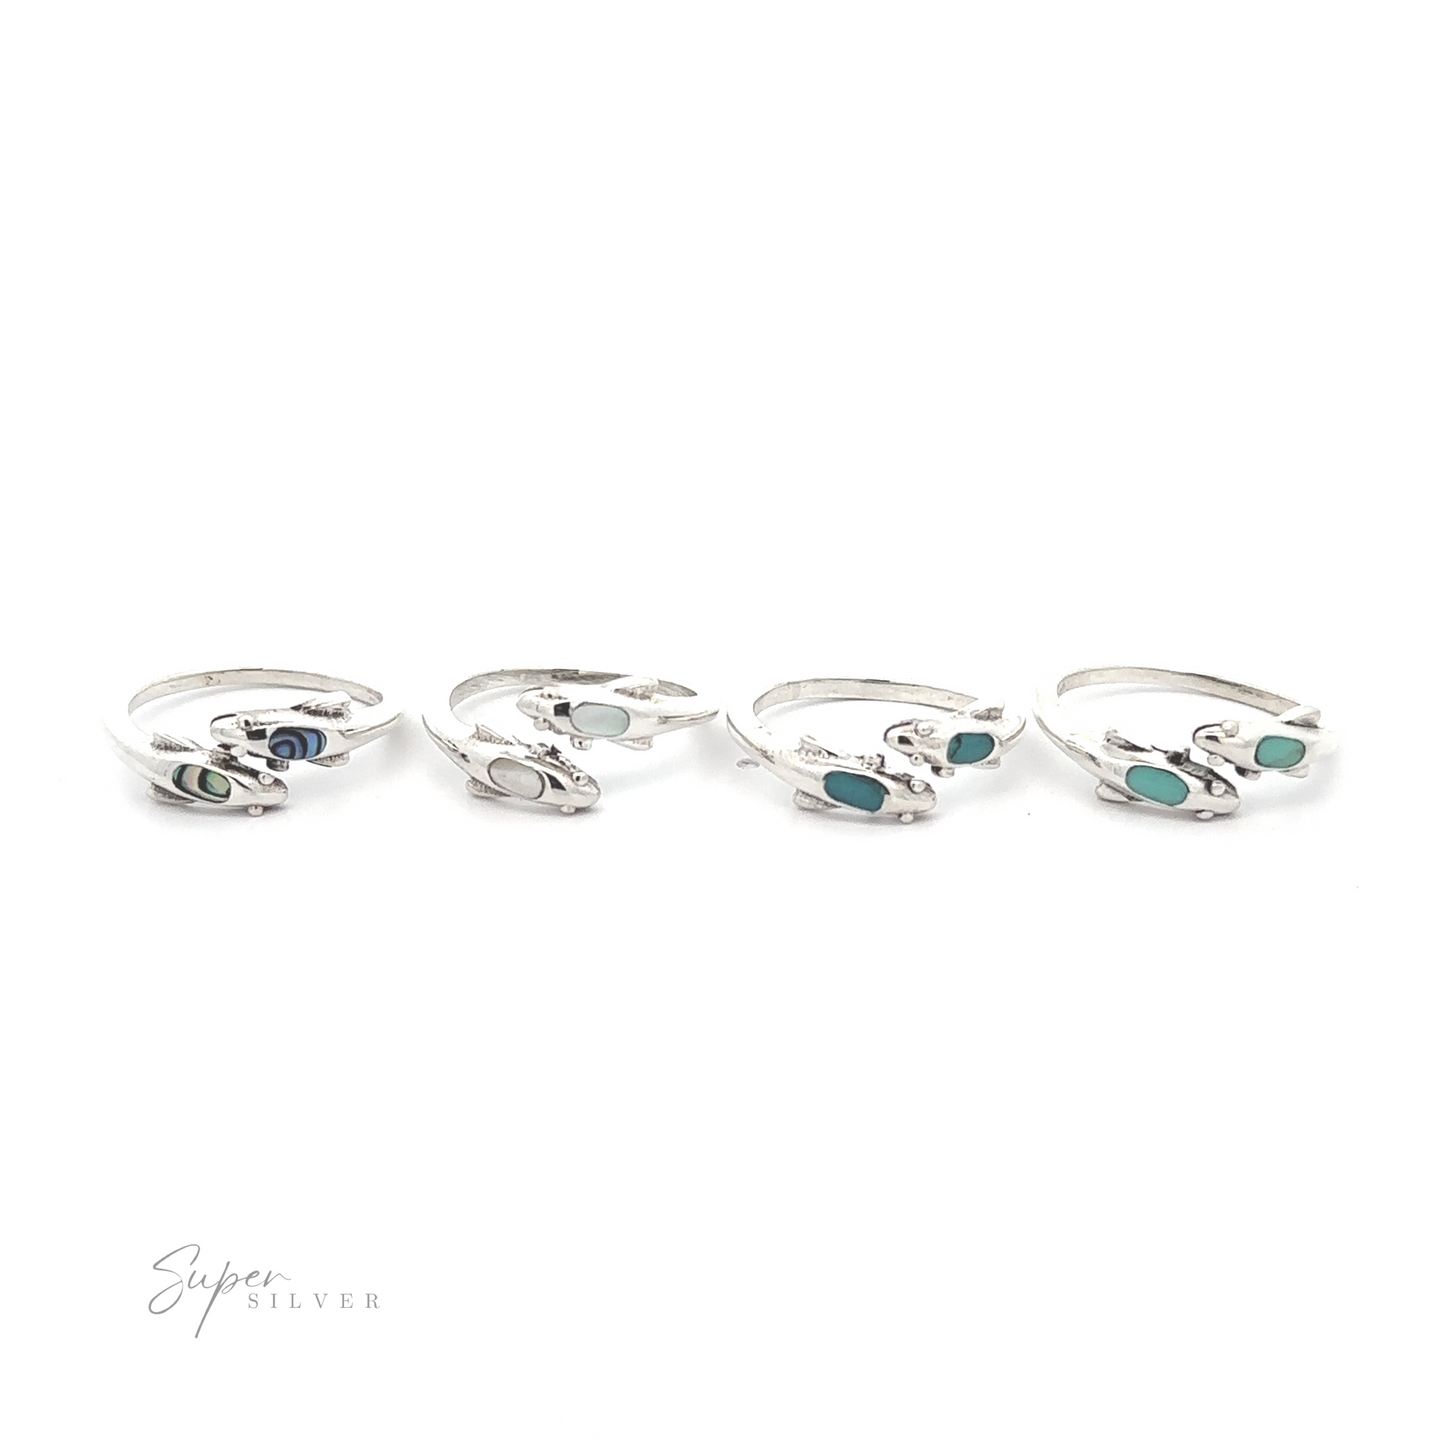 
                  
                    Four Dainty Inlaid Dolphin Rings with varying shades of blue and green gemstone inlays, displayed on a white background.
                  
                